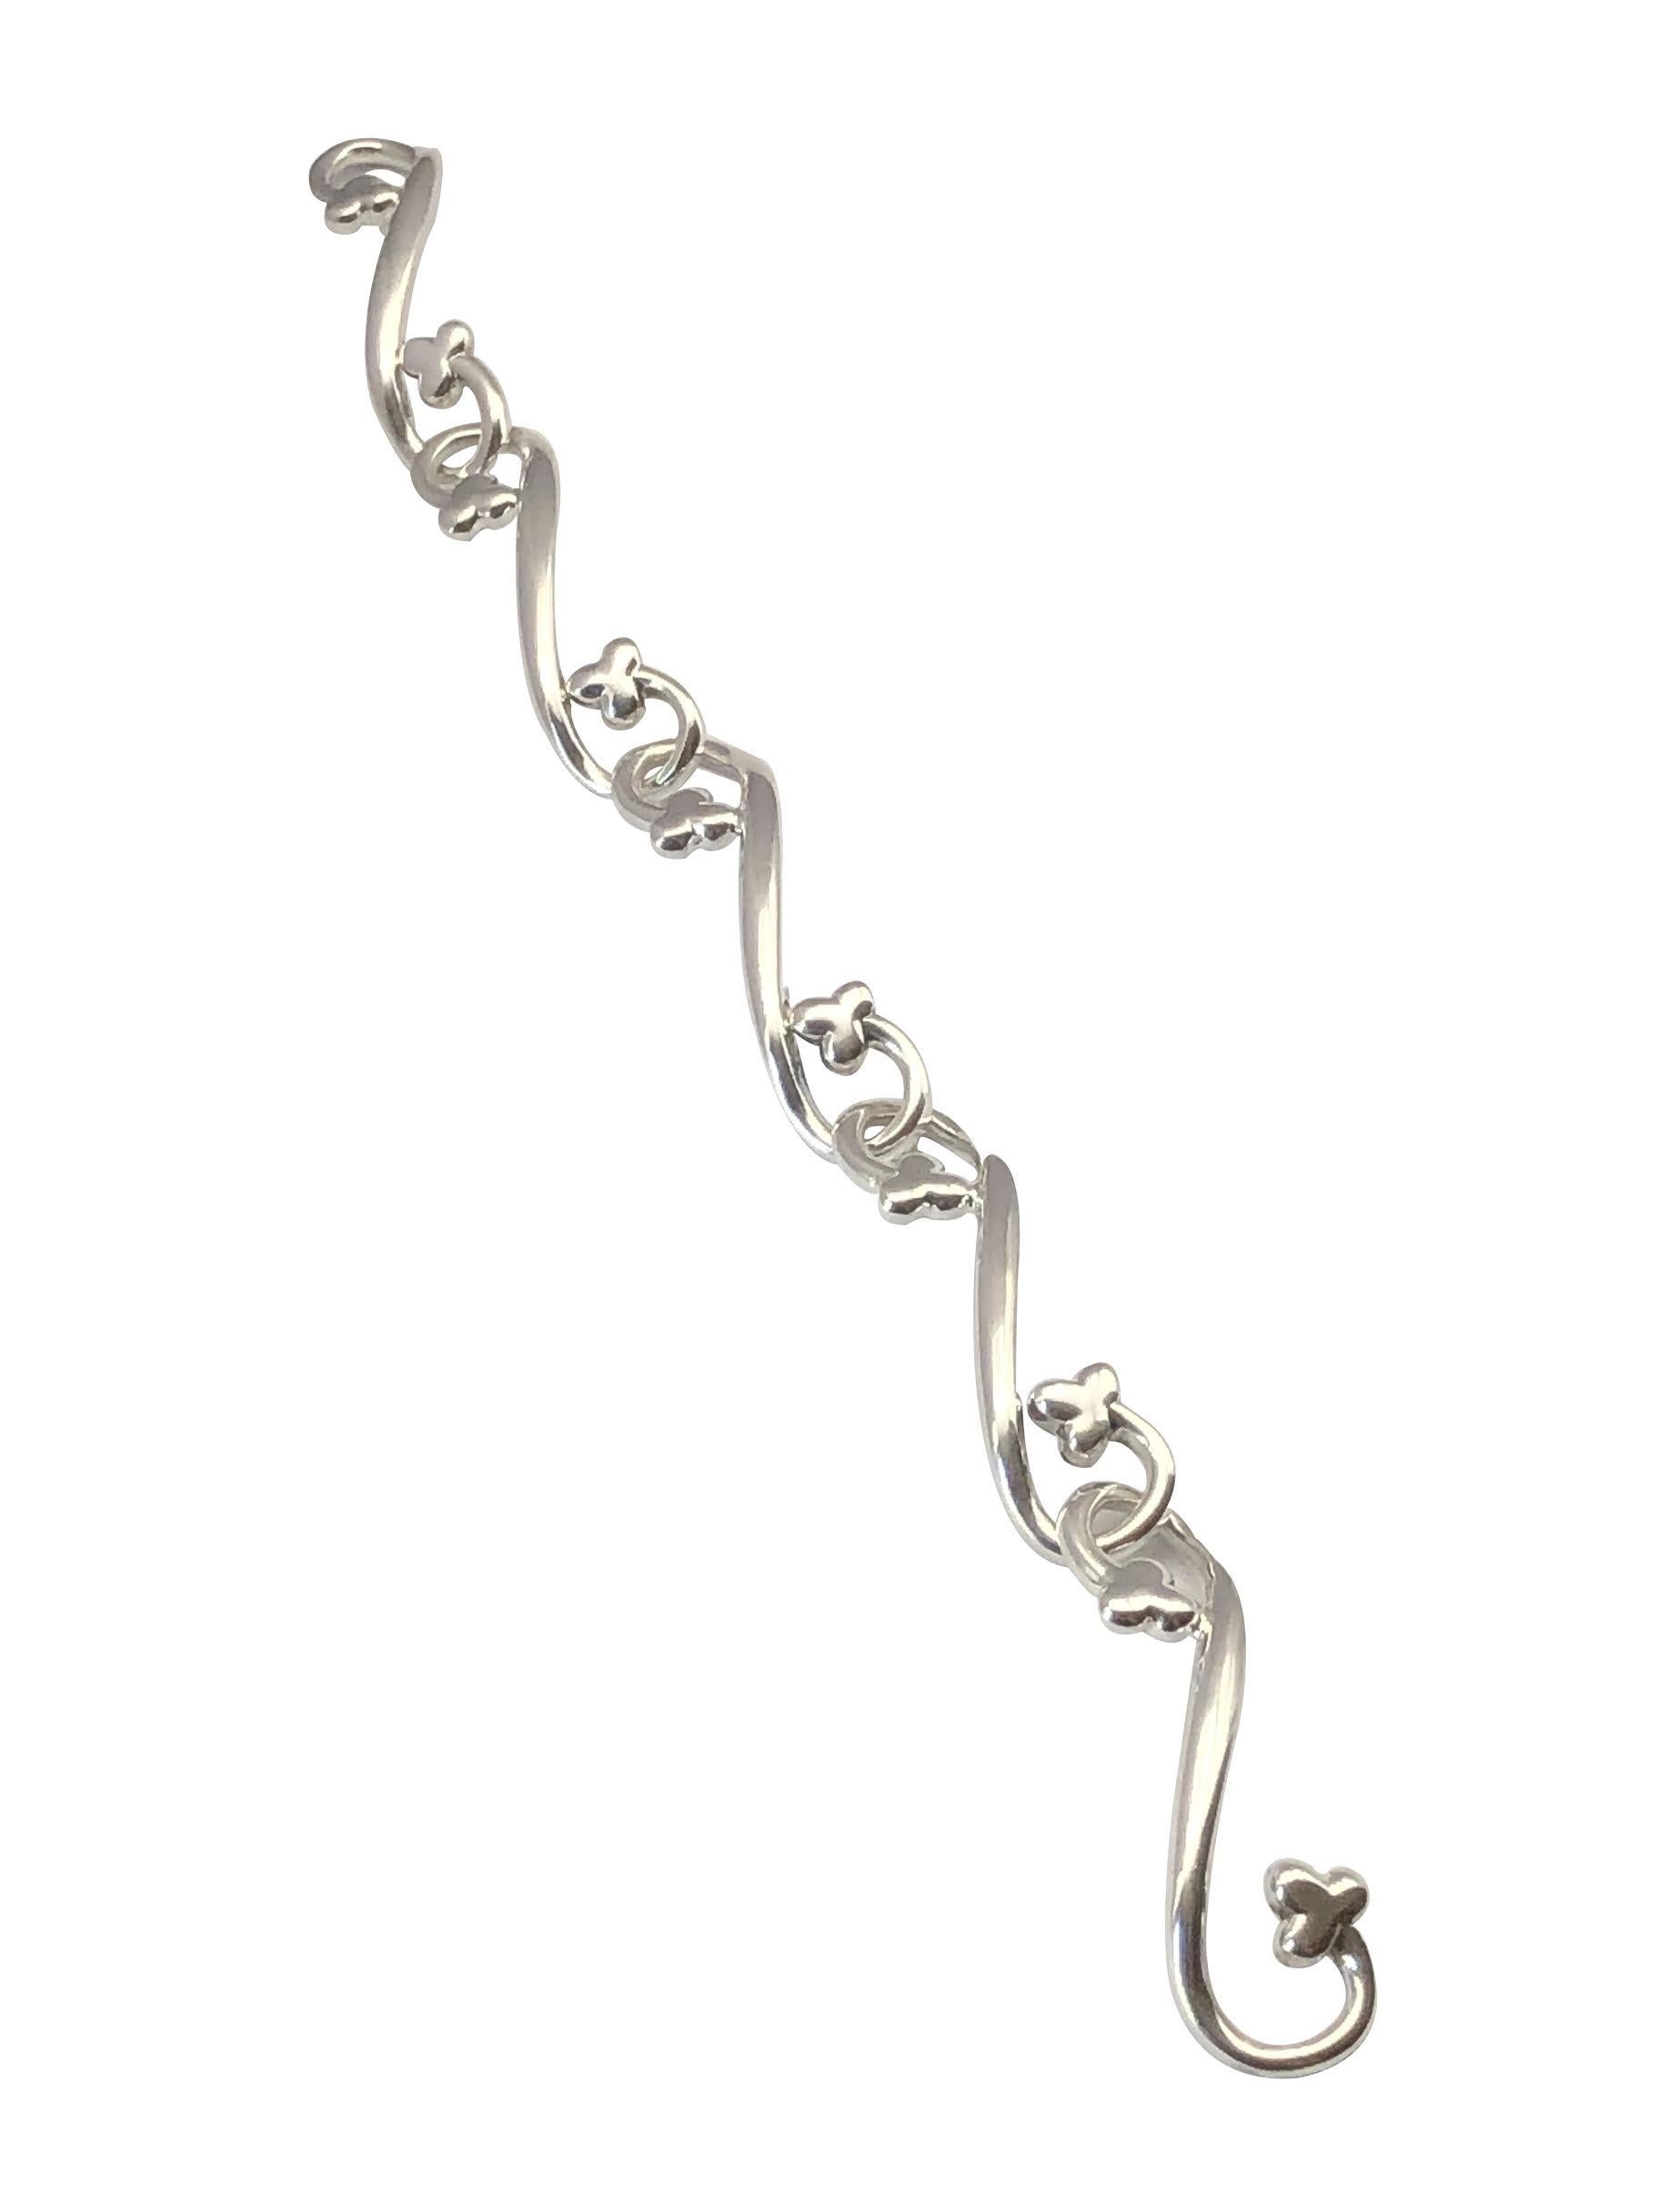 Circa 1987 Angela Cummings Sterling Silver Bracelet, comprised of long solid bar links curved at each end with a Clover, bracelet length 8 inches, this Cummings piece dates from just before her famous association with Tiffany & Company with many of